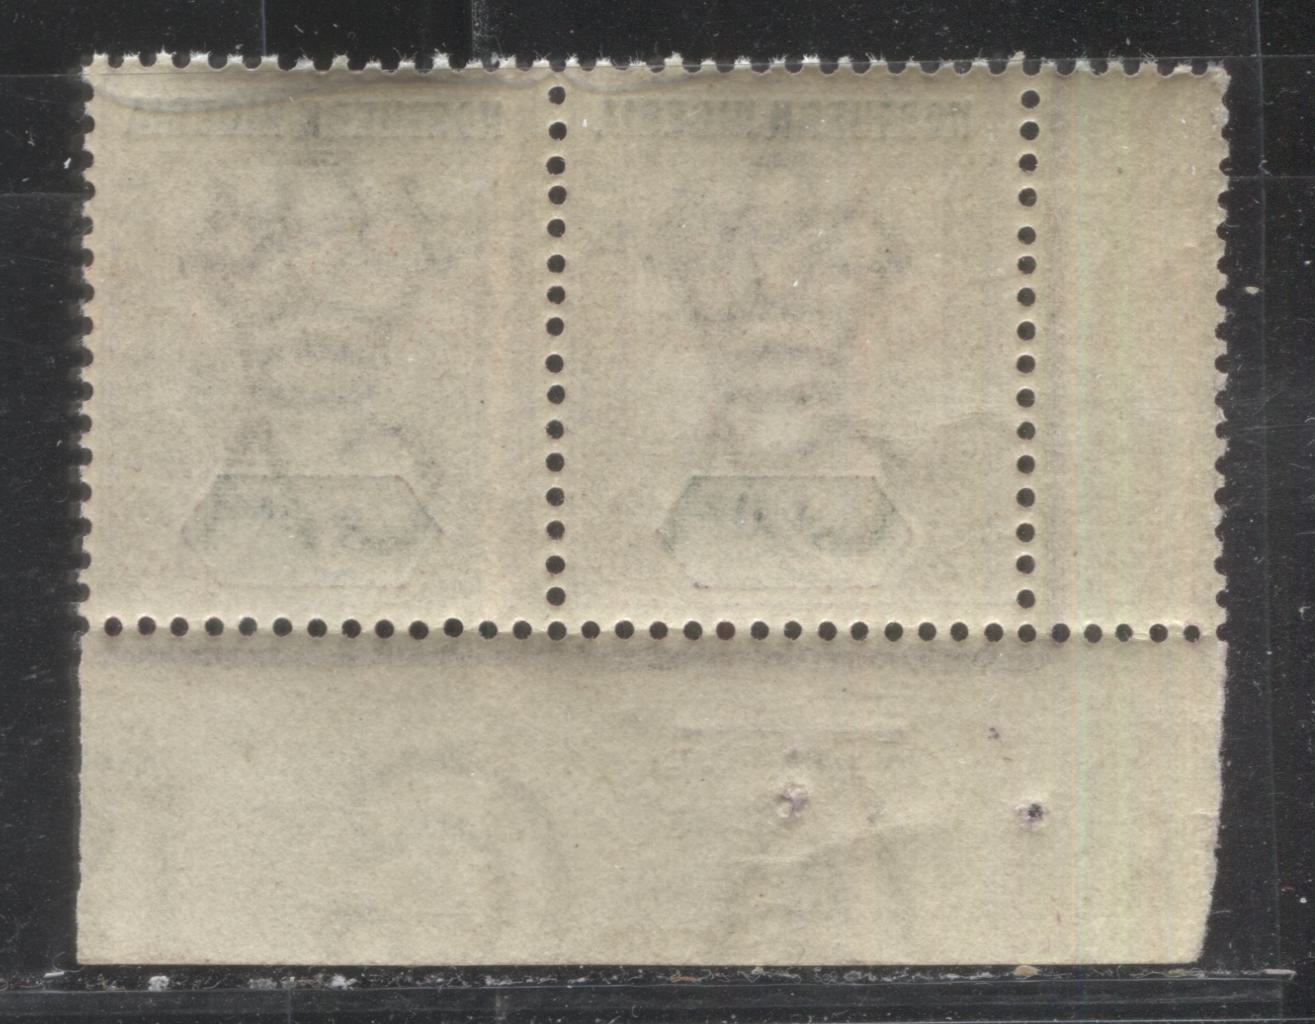 Lot 101 Northern Nigeria SG#1 1/2d Slate Lilac & Green and Pale Slate Lilac & Green Queen Victoria 1900-1902 Imperium Keyplate Issue, A VFNH Lower Left Margin Corner Pair, 113,640 Issued, SG Cat. 15 GBP = Approximately $25.5 For Fine OG, Est. $45